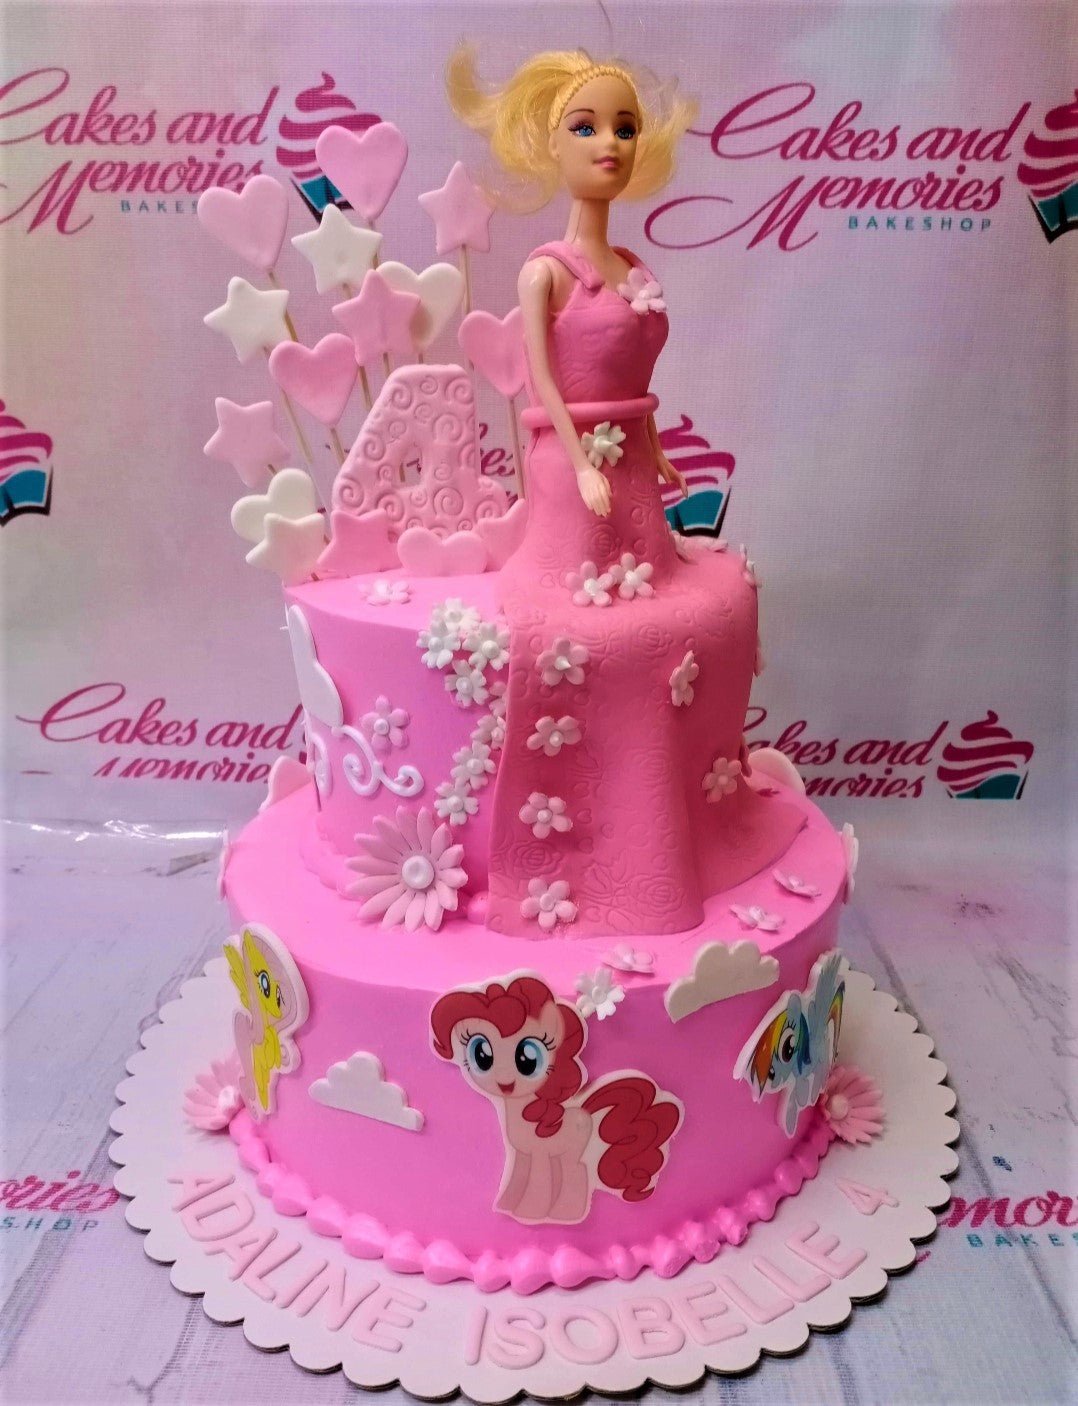 2 Tier Doll Cake | Doll cake designs, Doll cake, Barbie doll cakes